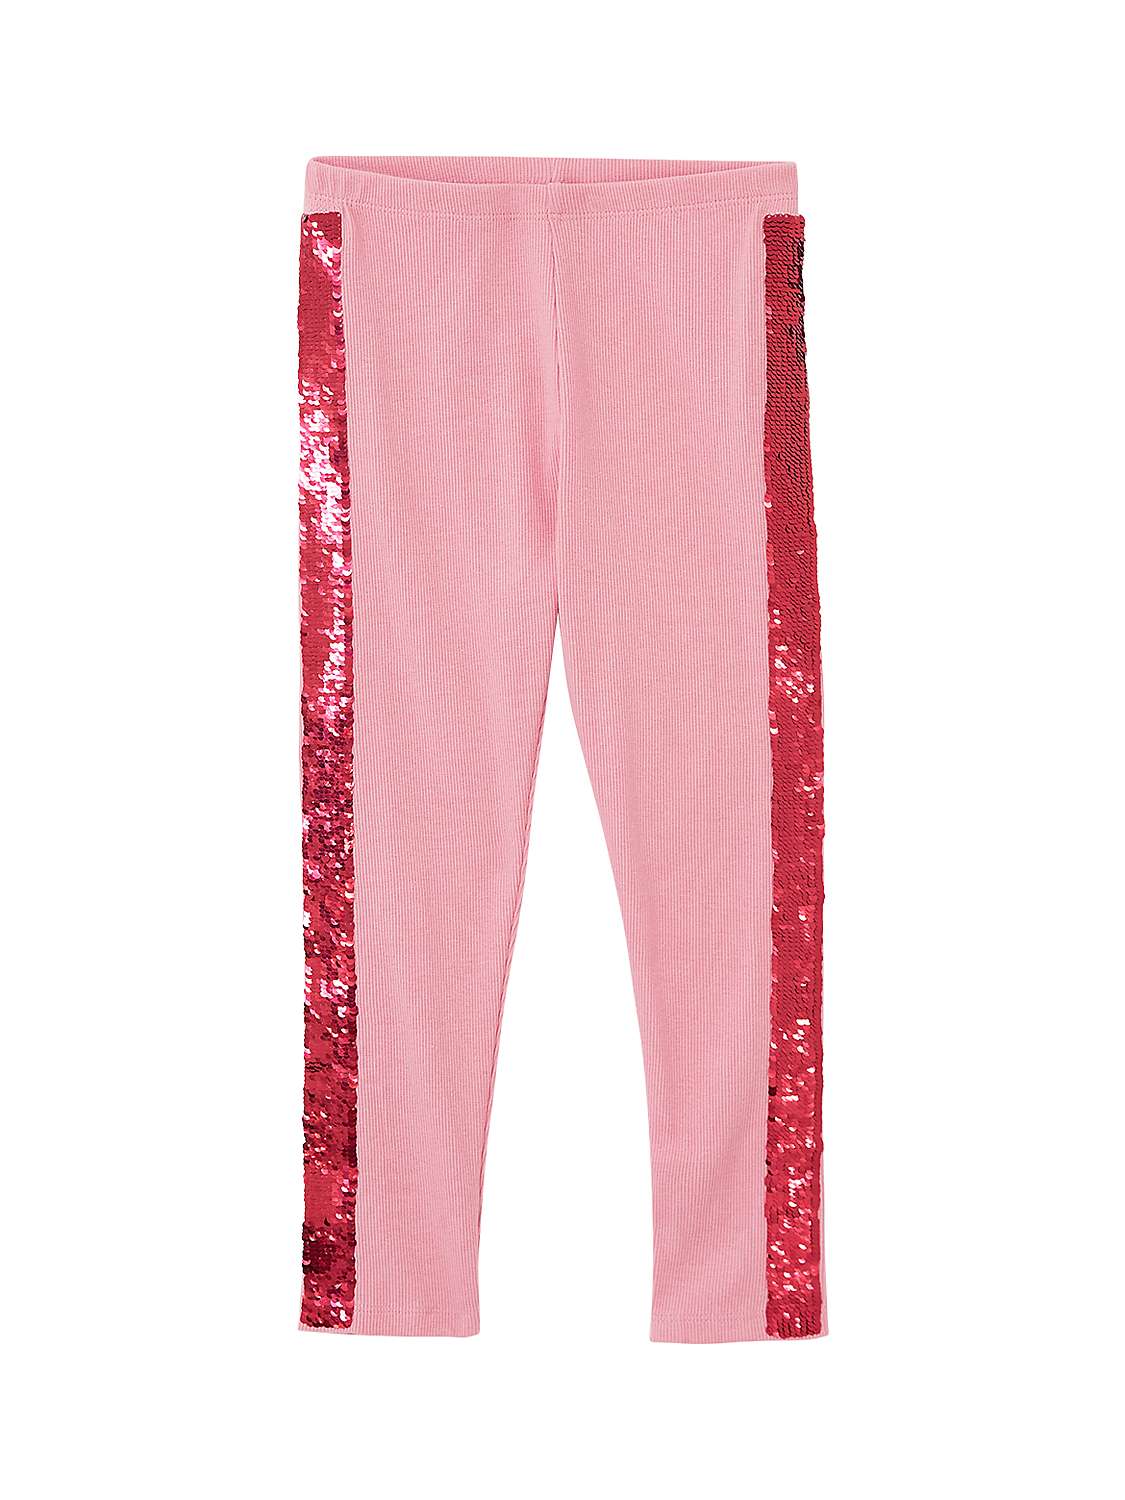 Buy Crew Clothing Kids' Special Sequin Leggings, Bright Pink Online at johnlewis.com